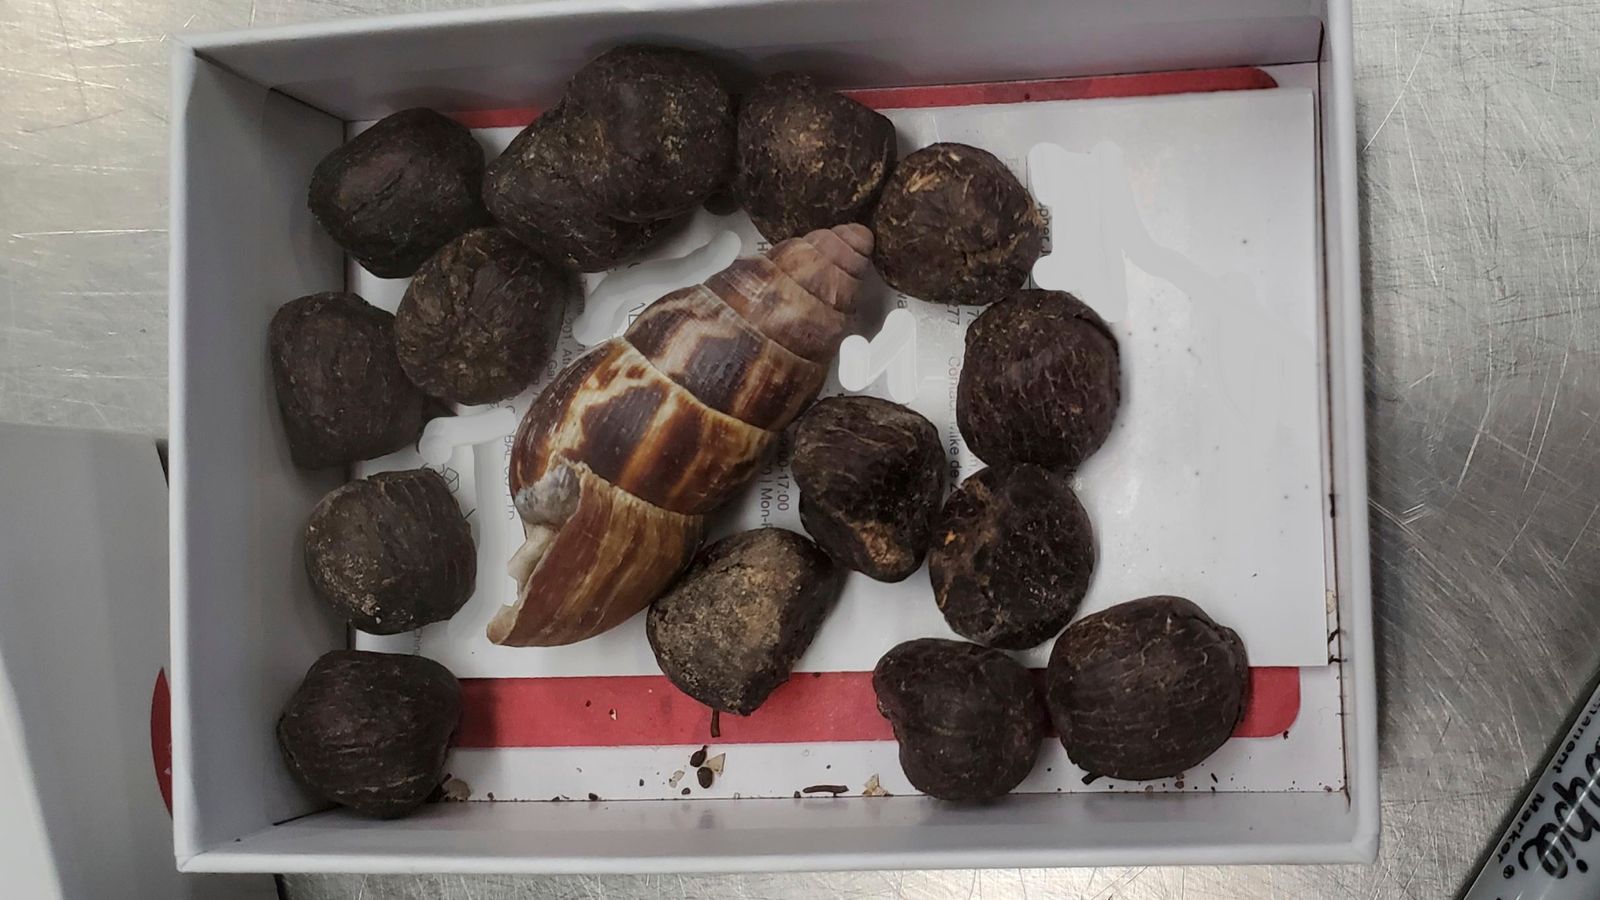 This undated photo provided by U.S. Customs and Border Protection shows a small box of giraffe feces that was confiscated from a passenger arriving from Kenya at Minneapolis-St. Paul International Airport, Sept. 29, 2023. The passenger, who was not identified, told officials she planned to use the waste to make a necklace, as she had done in the past with moose poop. (U.S. Customs and Border Protection via AP)